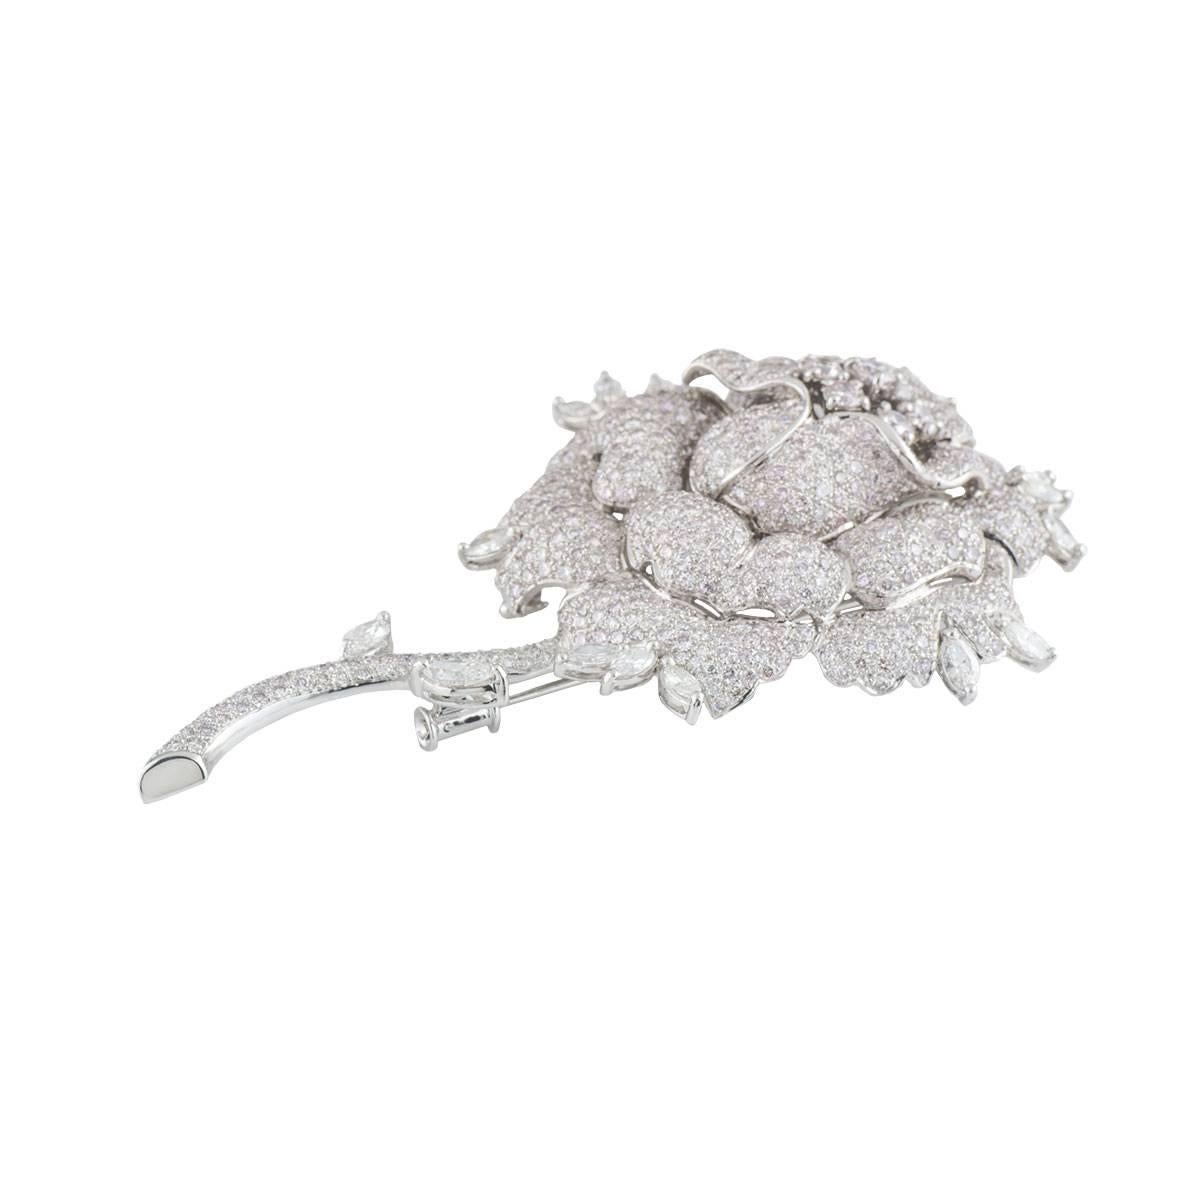 A sparkly and significant 18k white gold diamond brooch. The brooch comprises of a rose flower motif encrusted with approximately 724 round brilliant and marquise cut diamonds. The diamonds have a total approximate weight of 11.21ct, G colour and VS